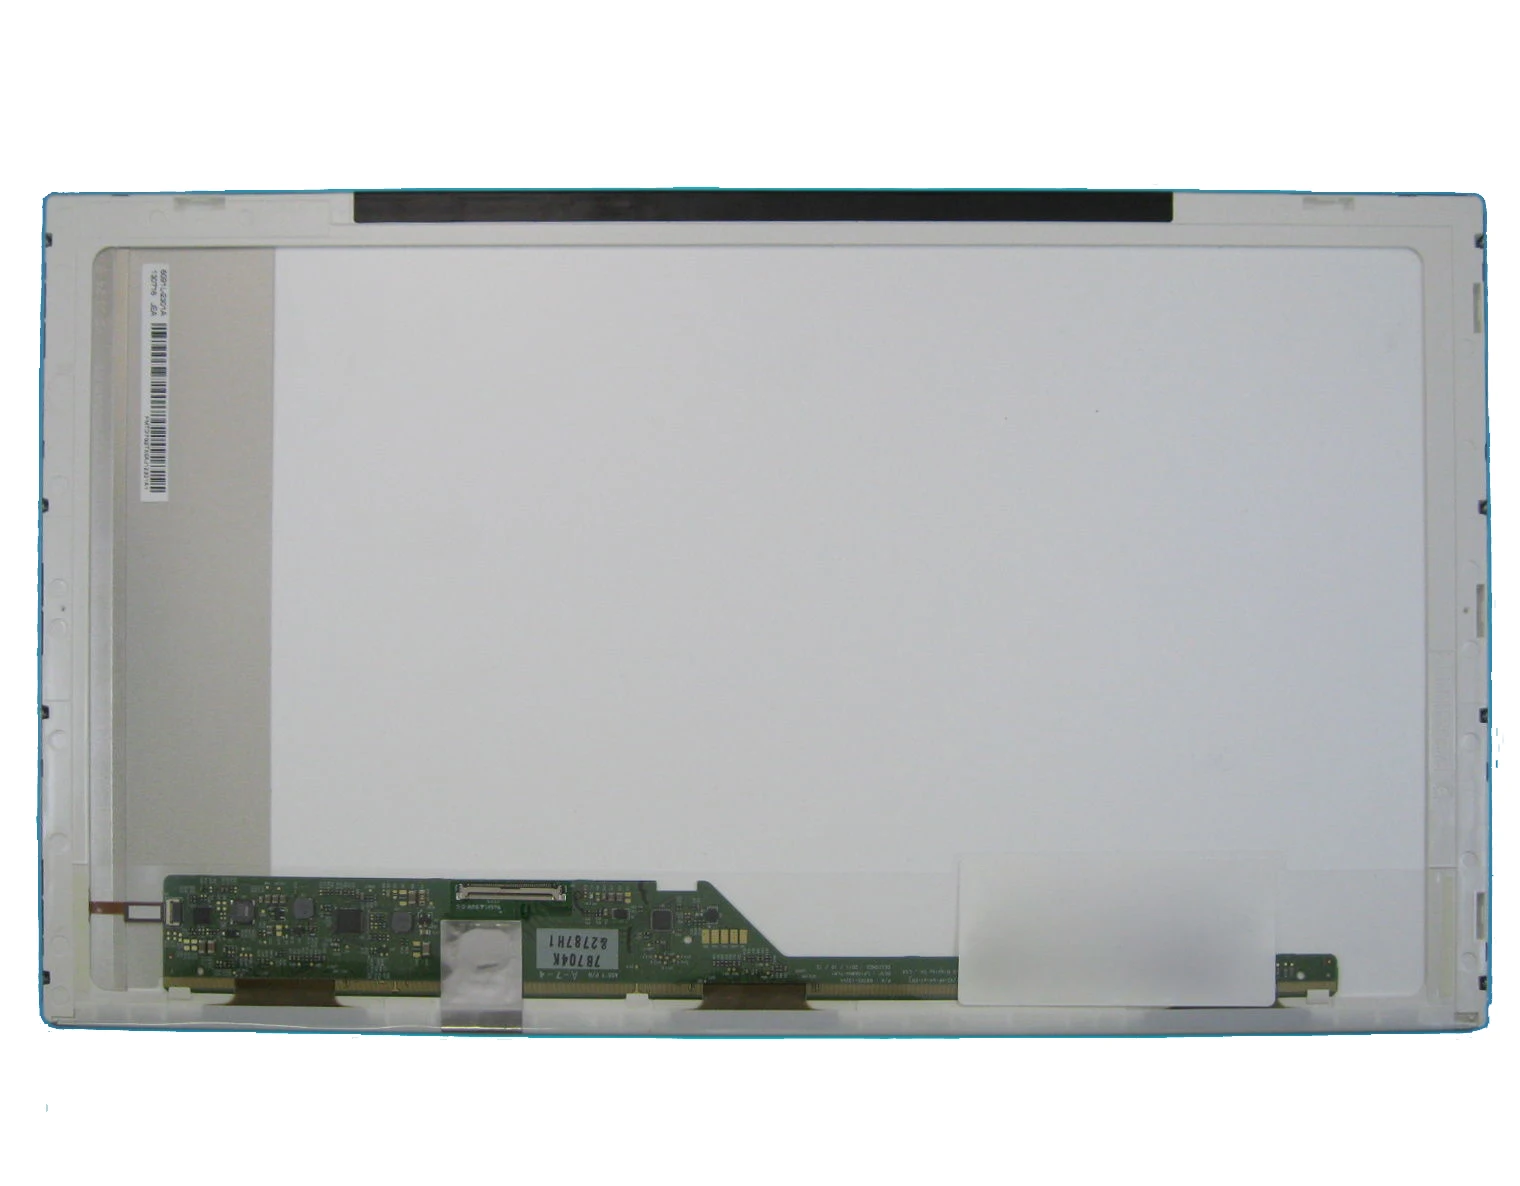 QuYing Laptop Screen 15.6 inch 1366x768 LED Replacement For Acer EXTENSA 5635G 5635ZG 5635Z 5235 5635 SERIES